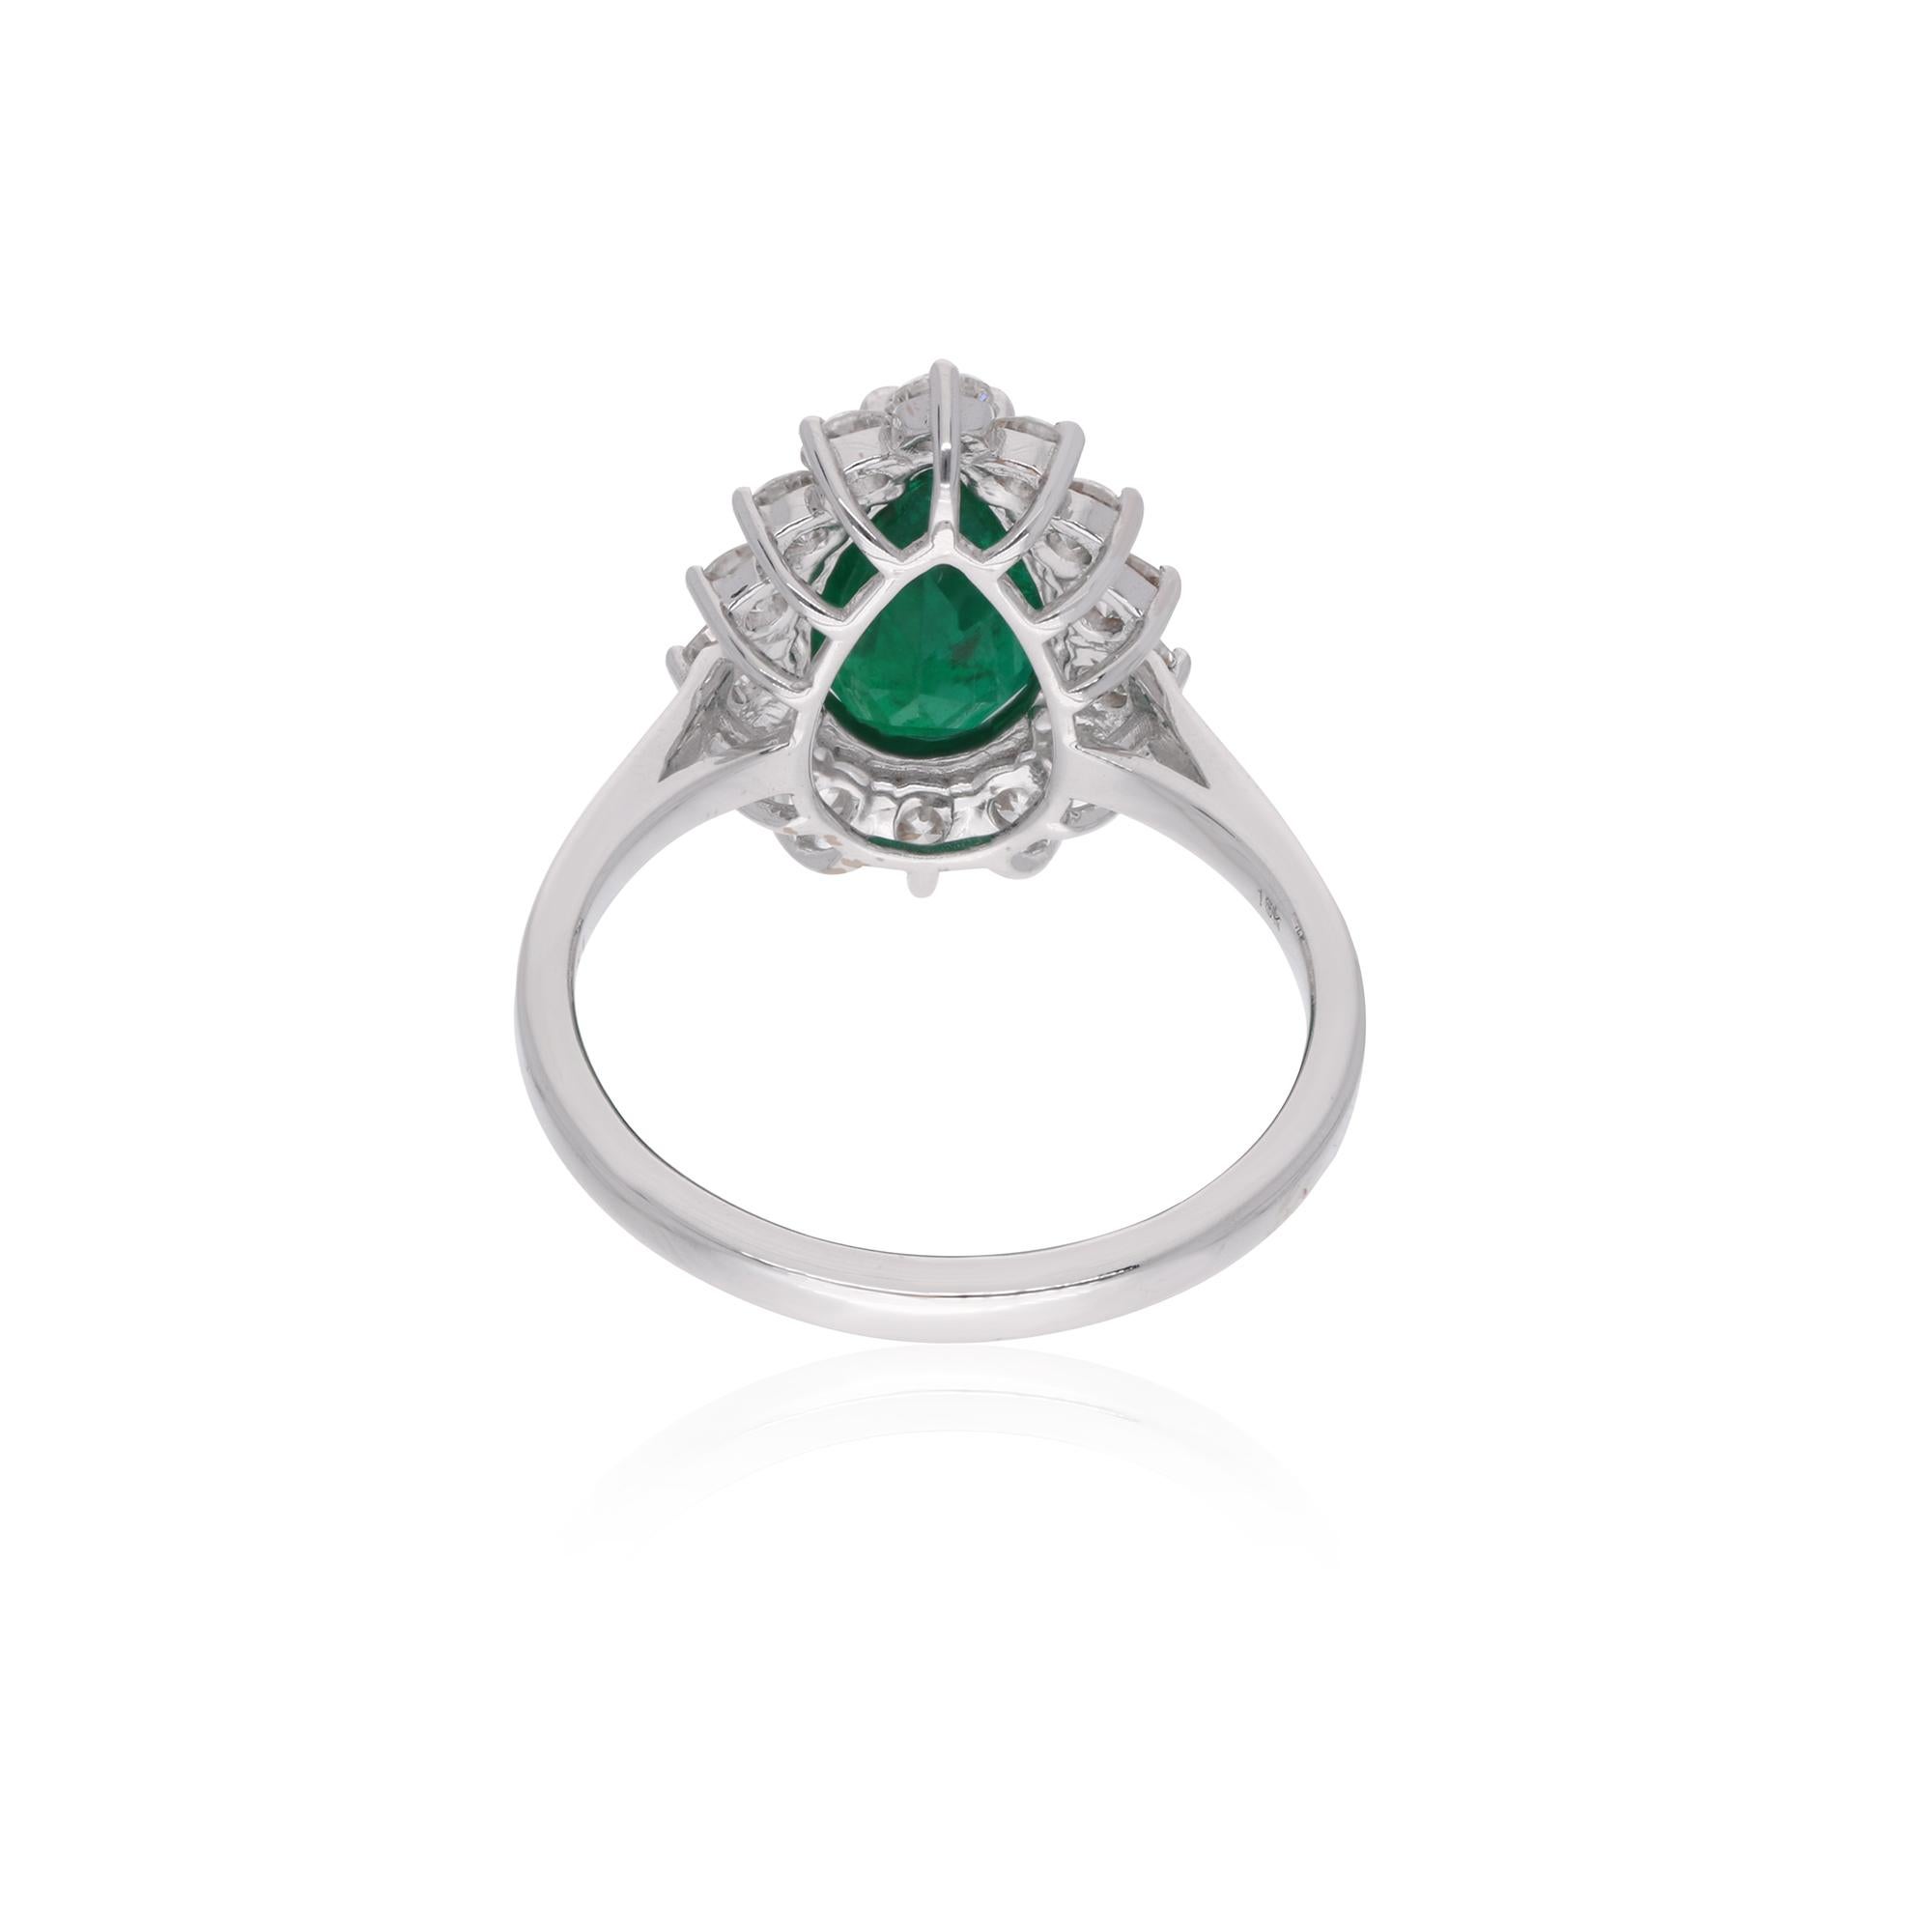 At its heart lies a magnificent pear-shaped Zambian emerald, renowned for its deep green hue and unparalleled clarity. Mined from the lush landscapes of Zambia, each emerald is meticulously selected for its exceptional quality, ensuring a brilliance